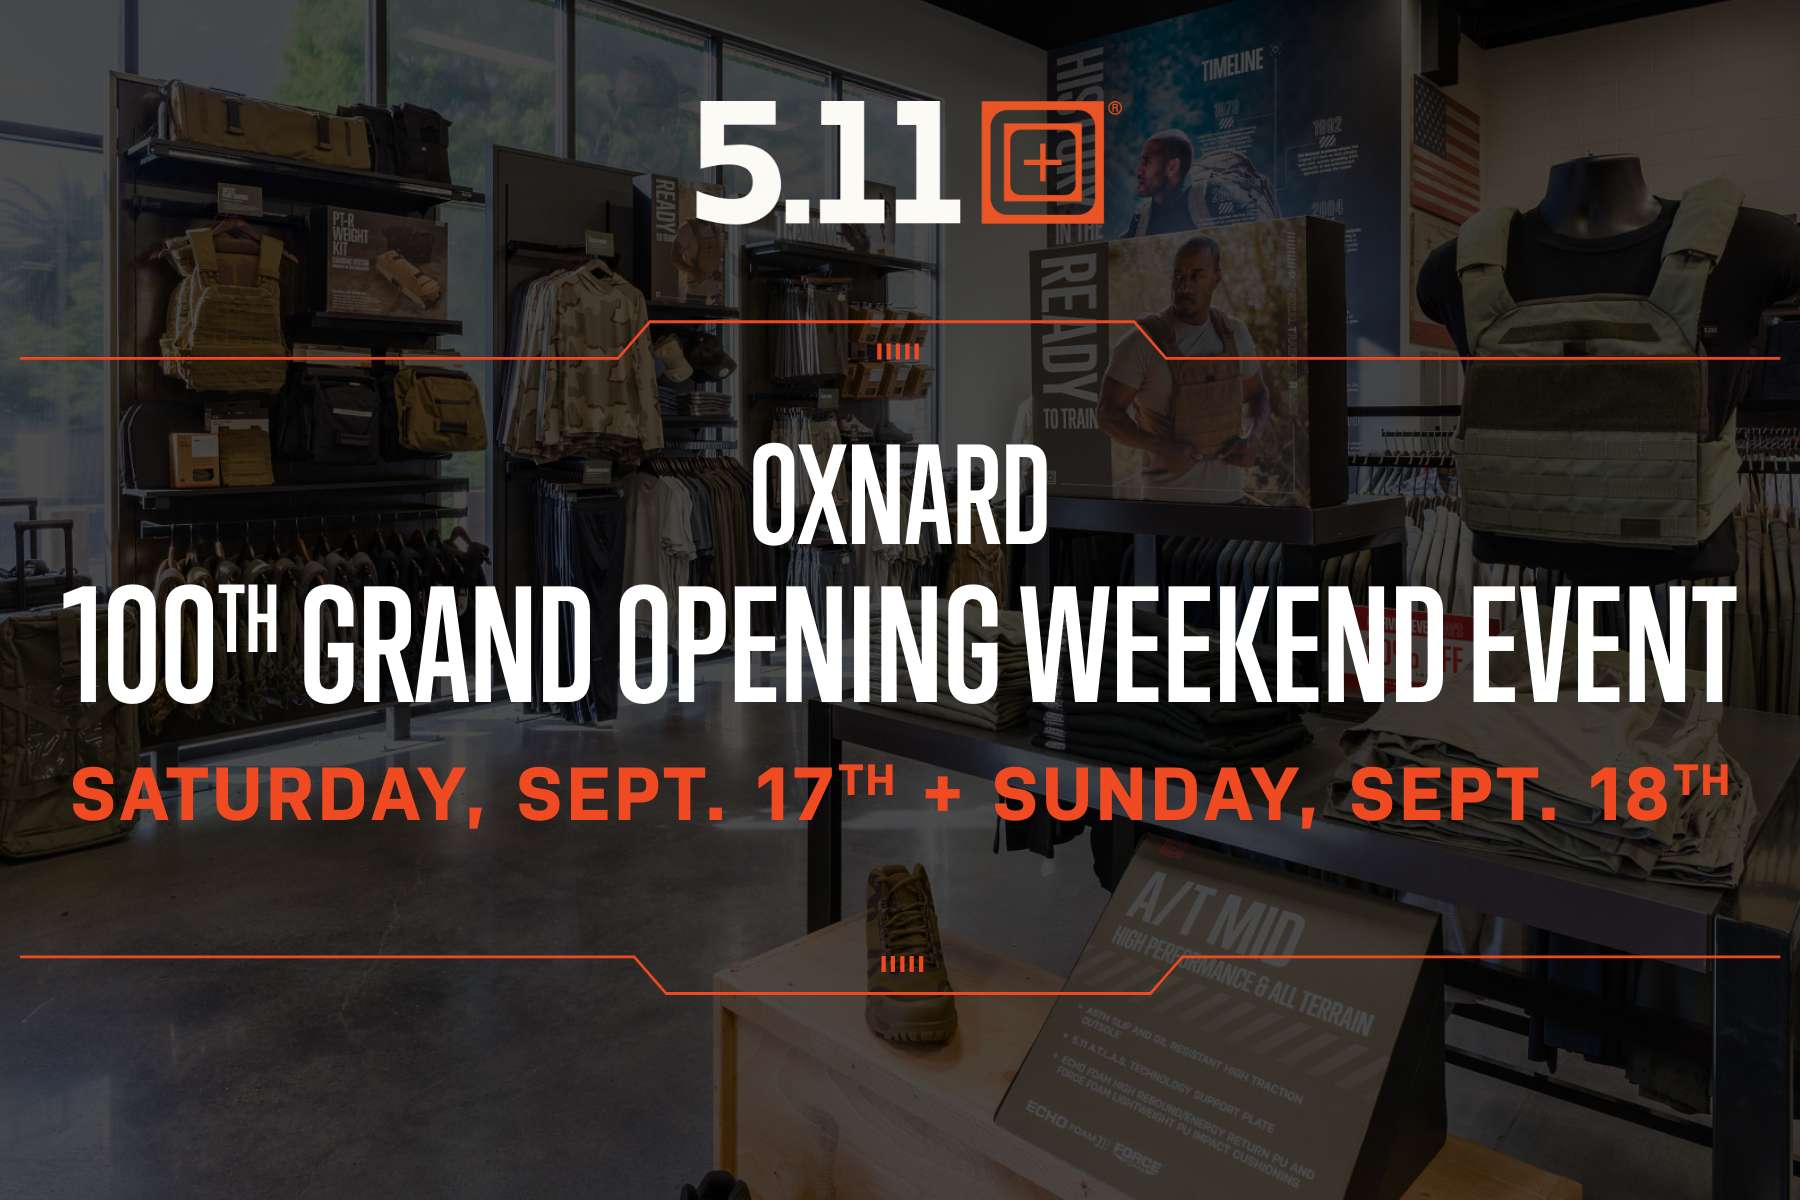 5.11 Oxnard Event┃100th Store Grand Opening